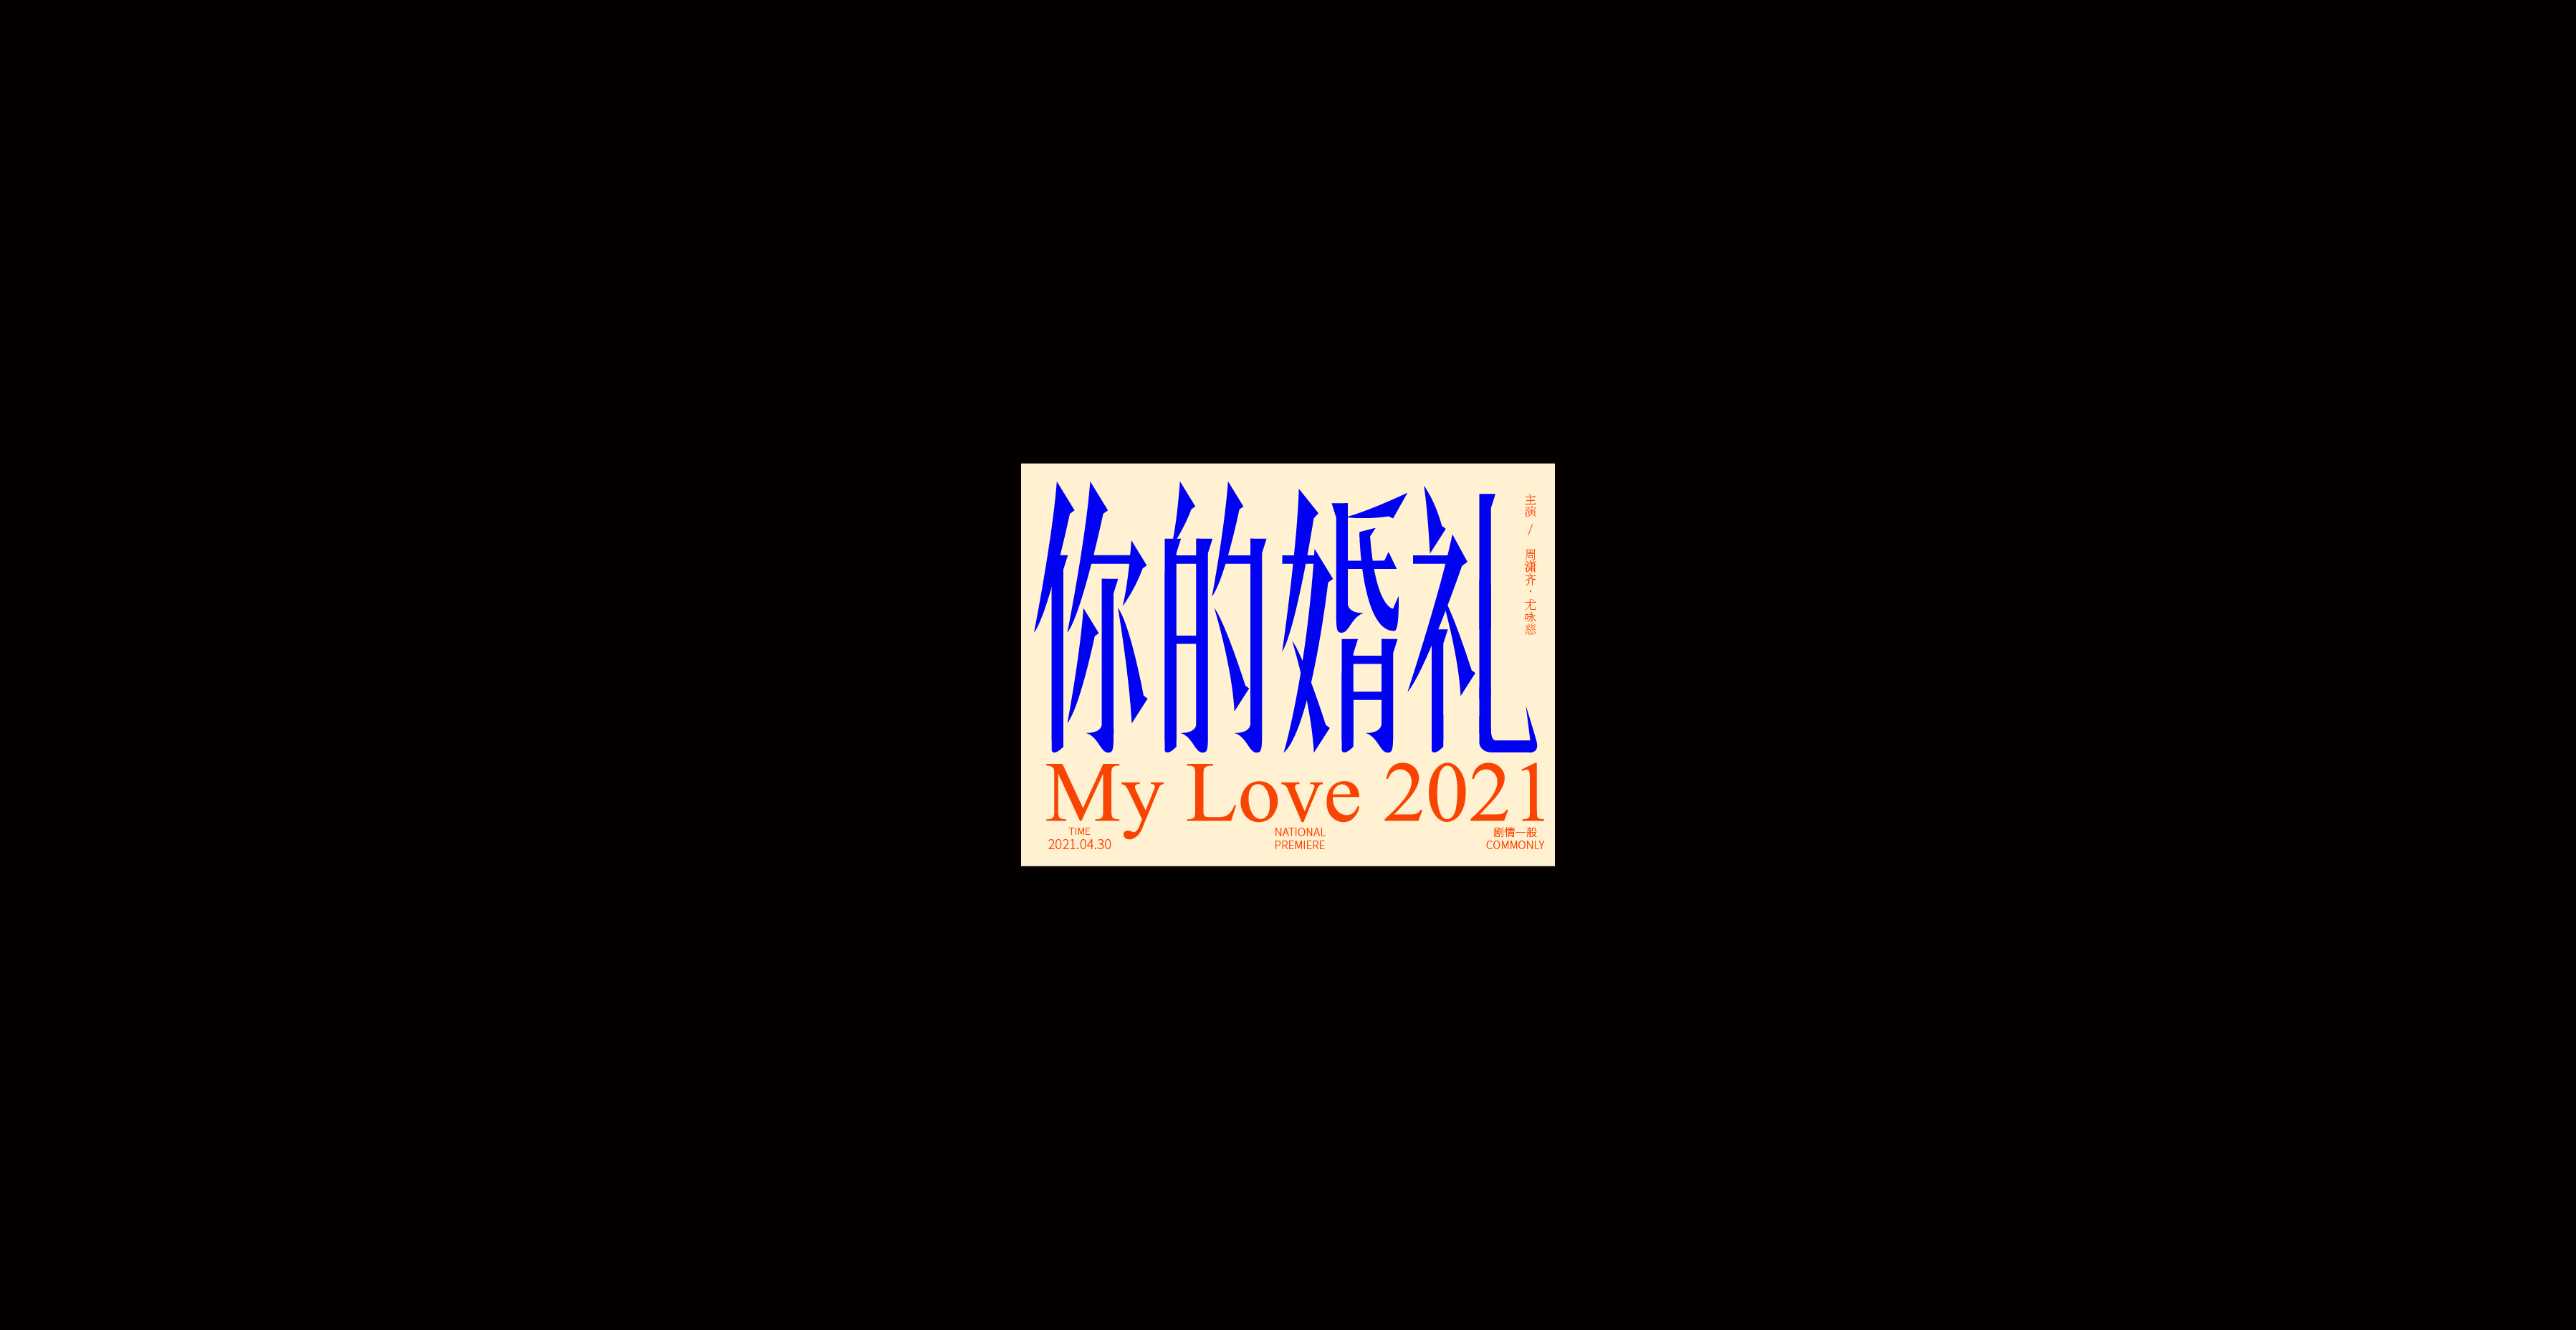 43P Collection of the latest Chinese font design schemes in 2021 #.223